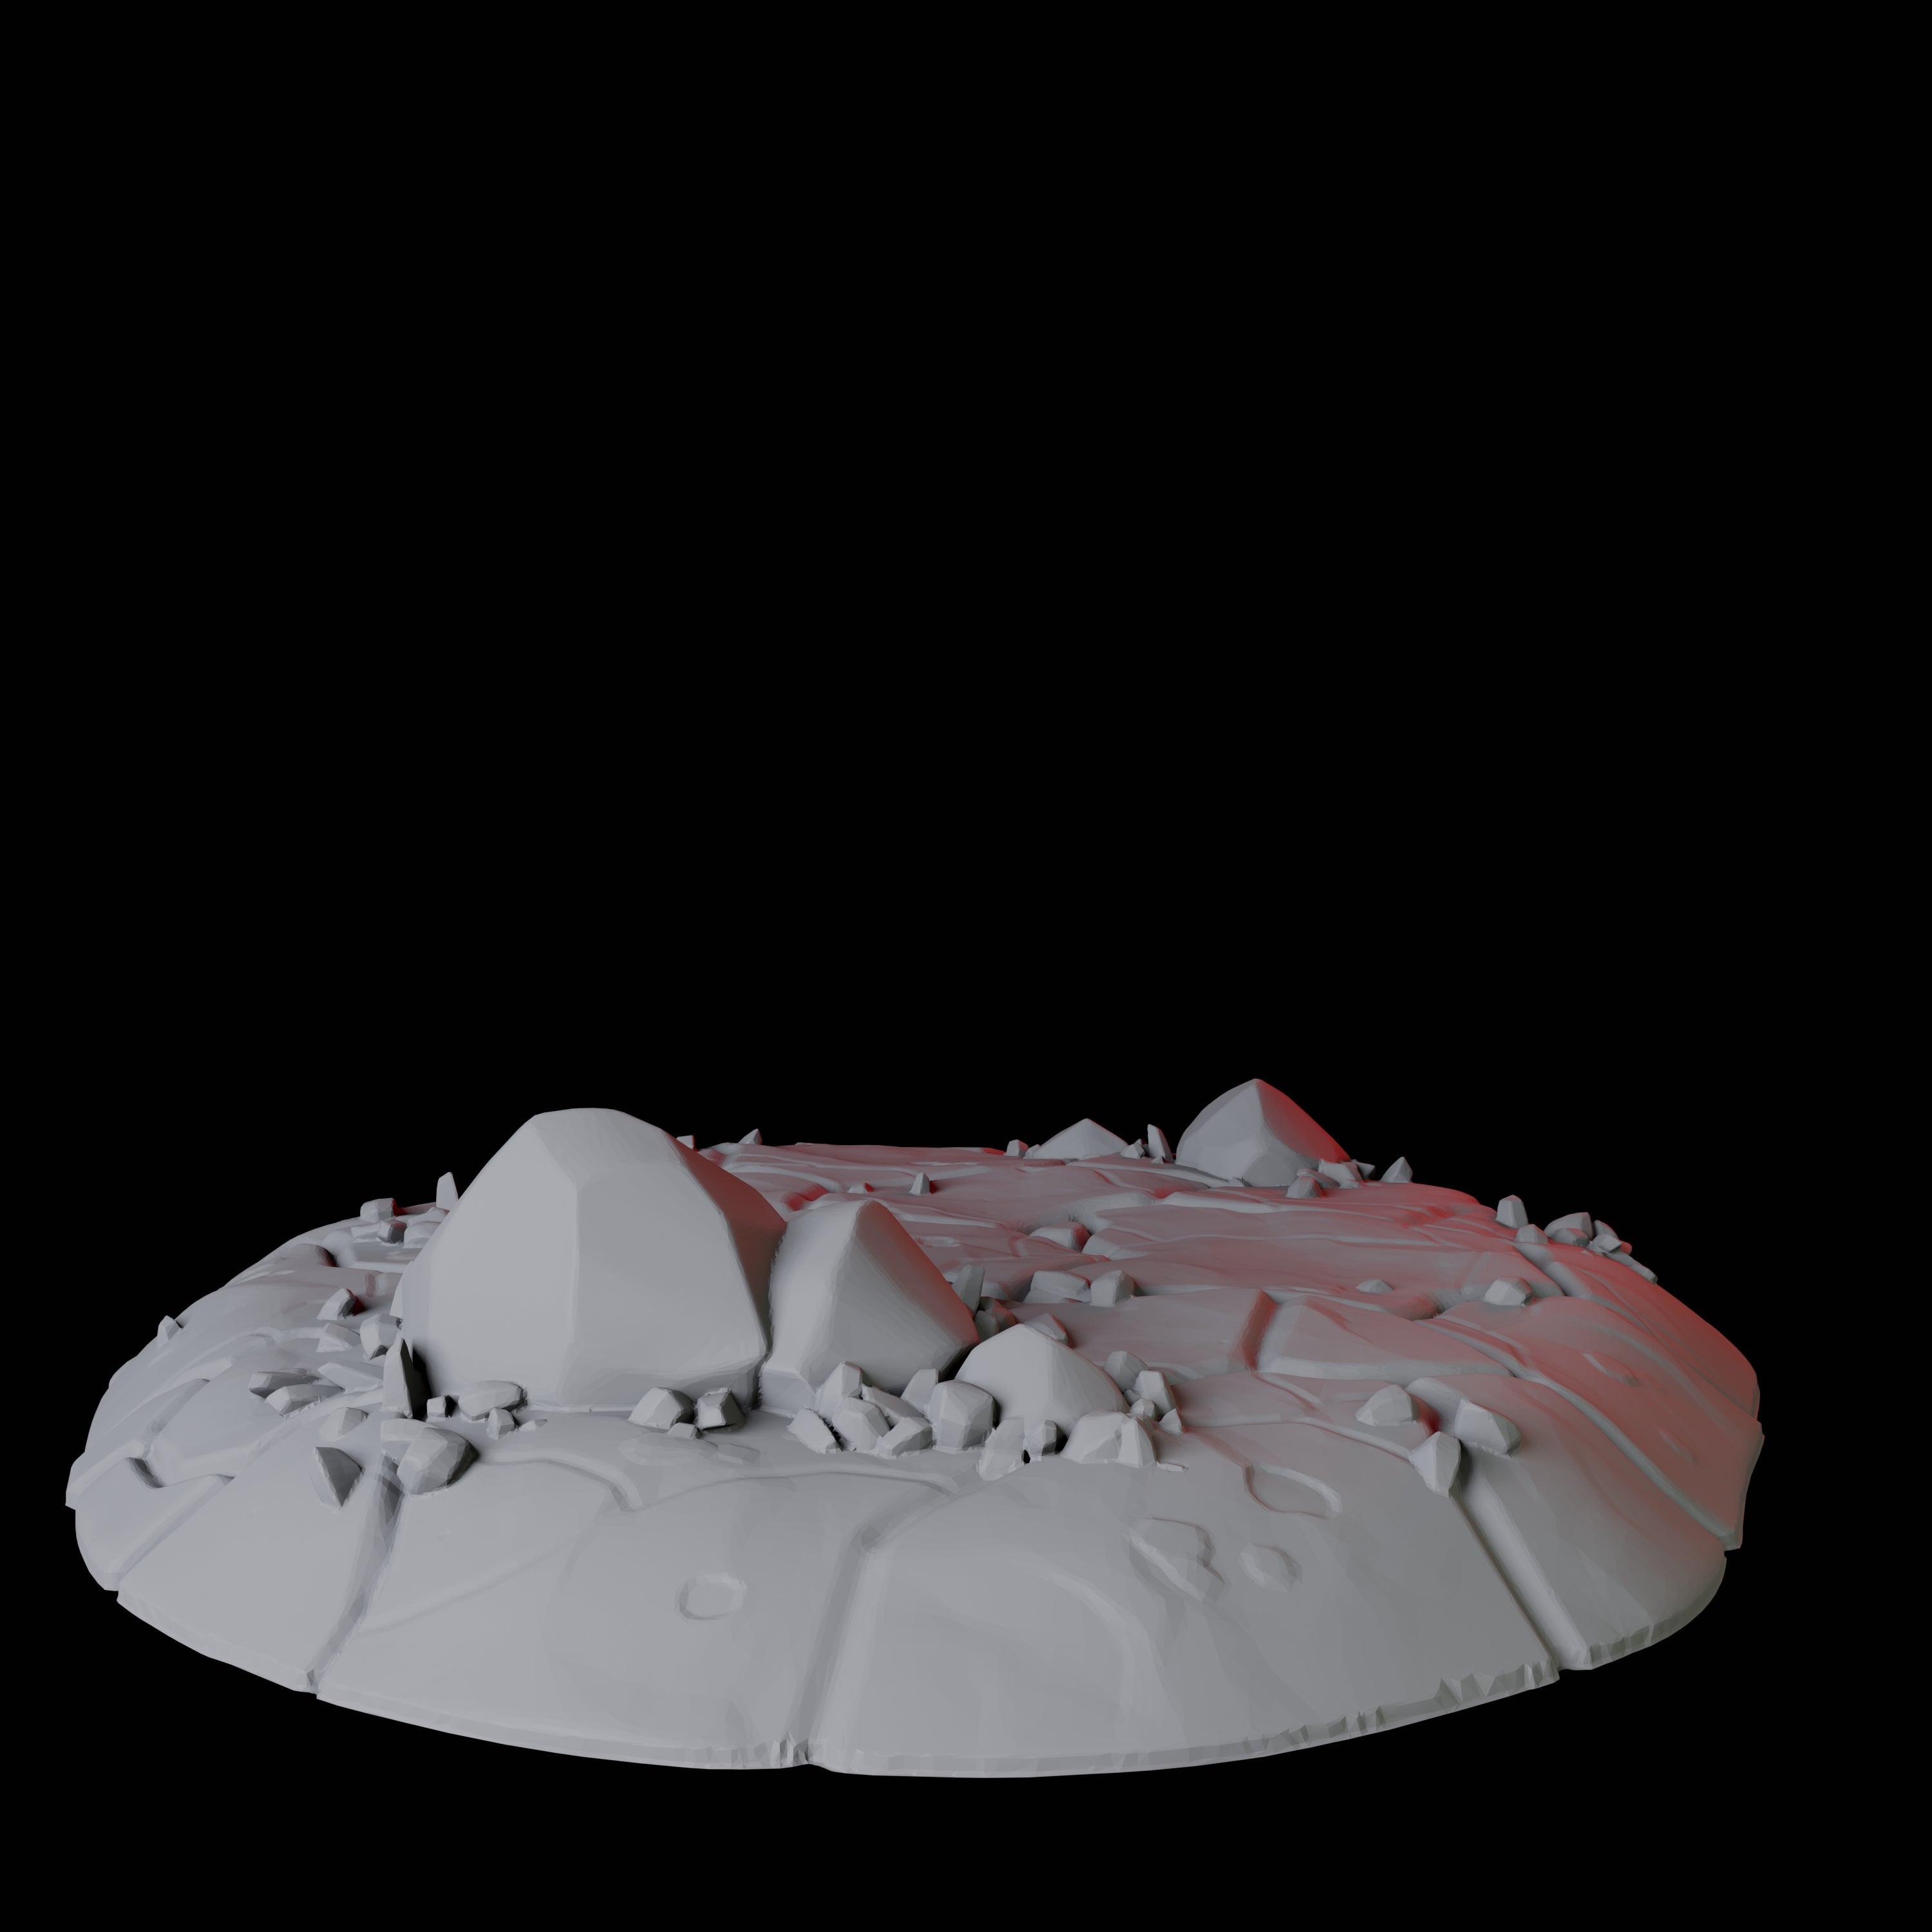 Hellscape Terrain Piece F Miniature for Dungeons and Dragons, Pathfinder or other TTRPGs